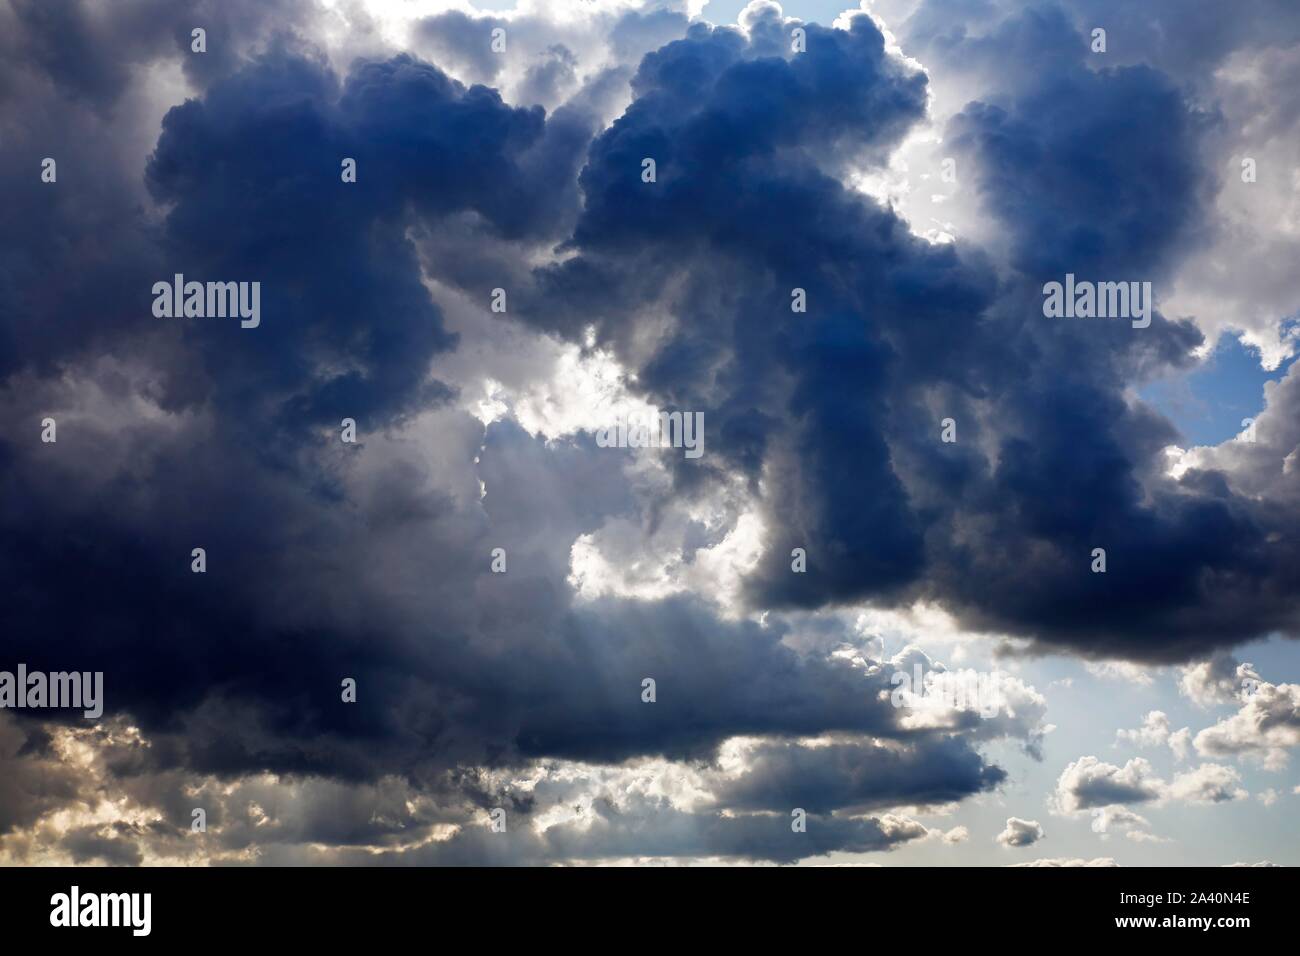 Dark rain clouds shortly in front of thunderstorms, Usedom Island, Mecklenburg-Western Pomerania, Germany Stock Photo